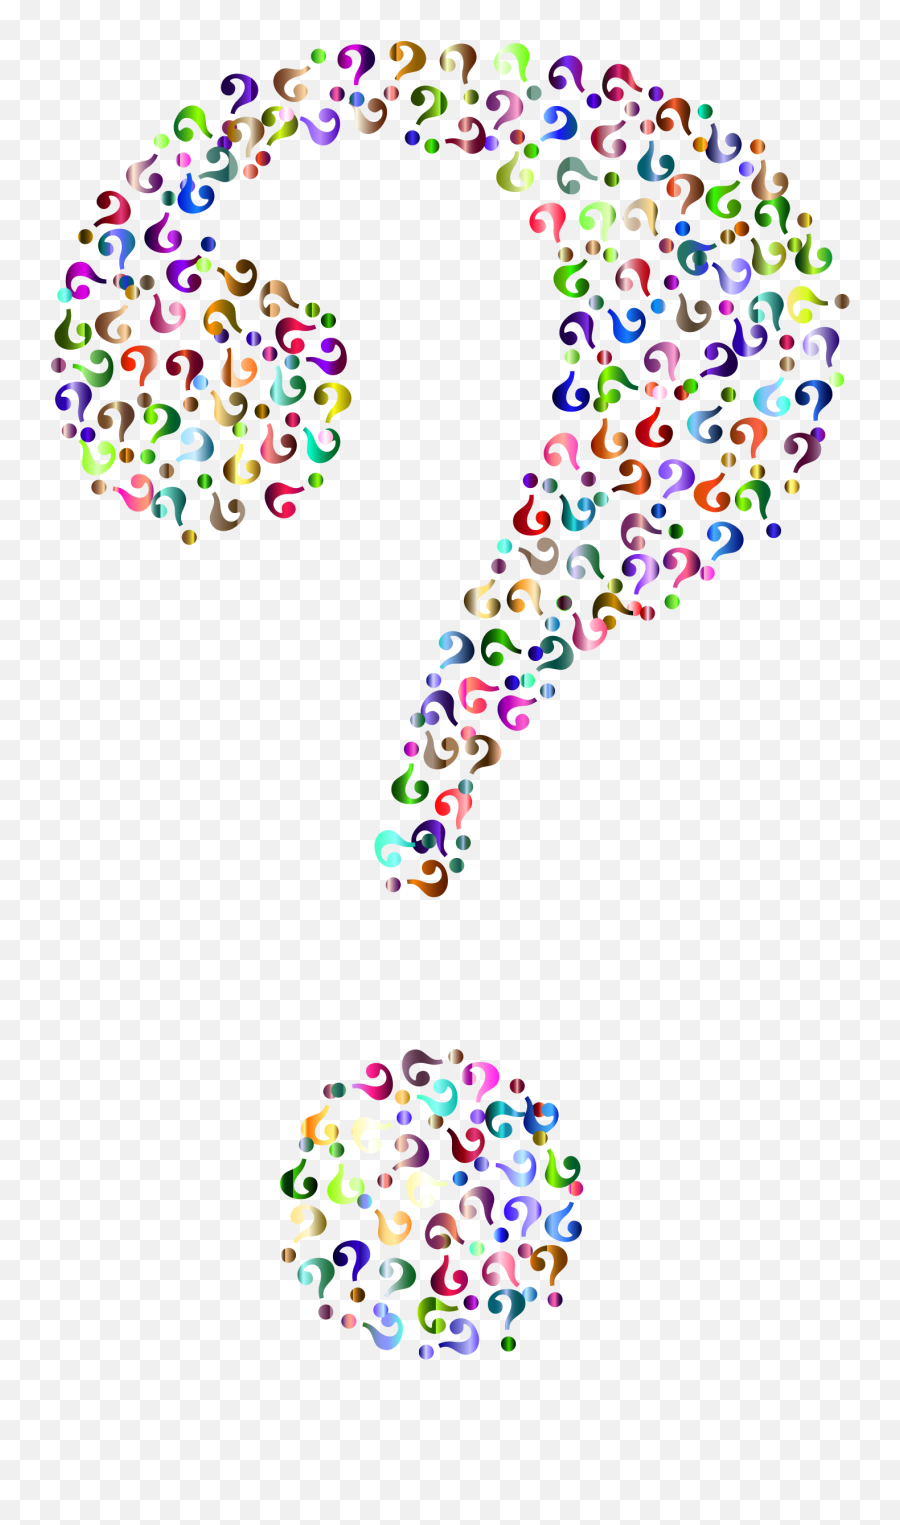 Download Big Image - Question Marks With No Background Transparent Background Questions Clip Art Png,Question Marks Png